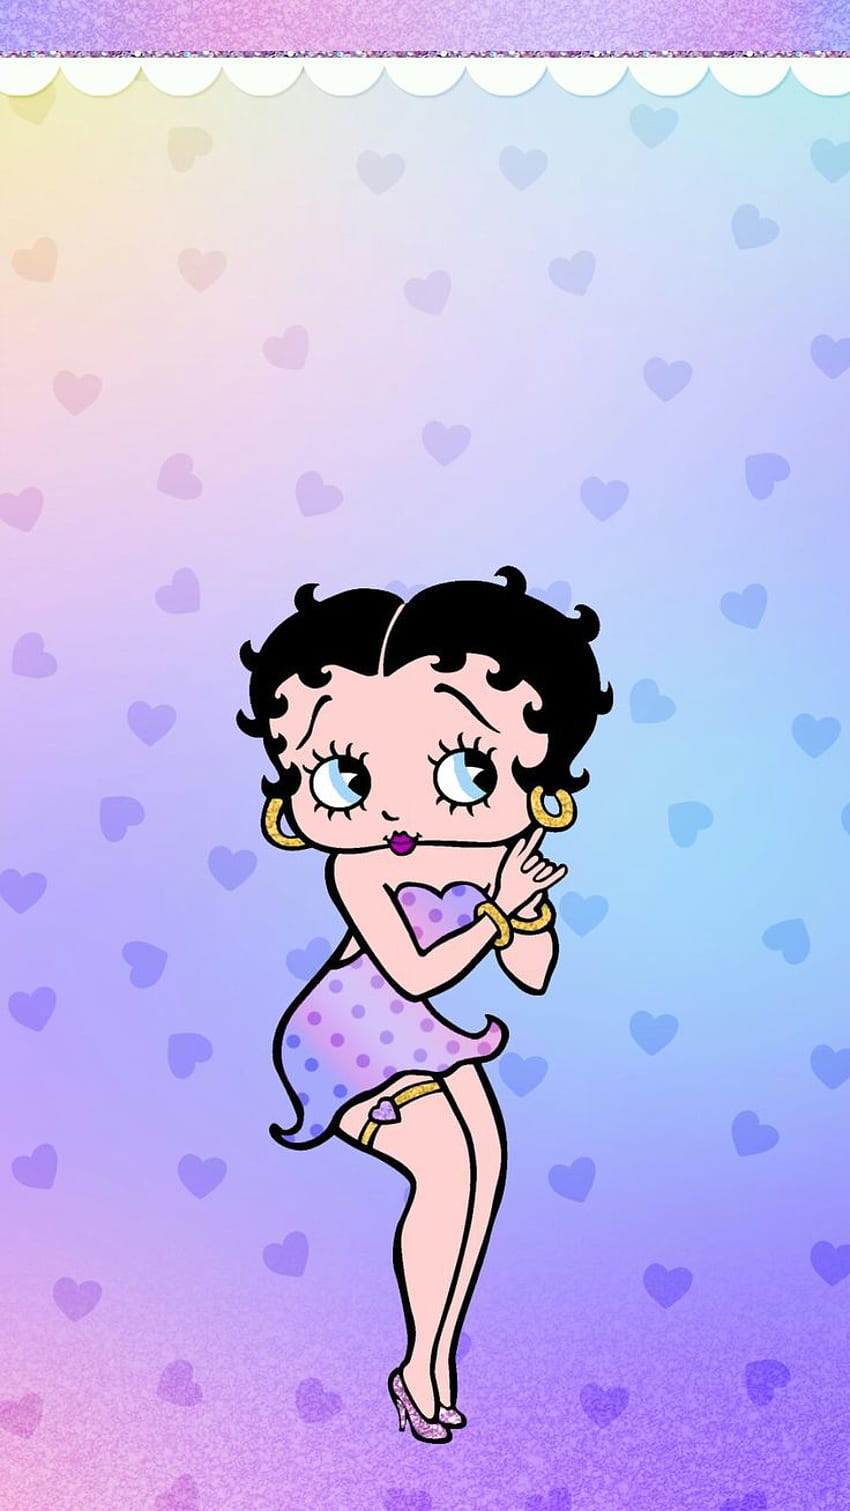 Betty Boop & timeline covers ideas in 2021. betty boop, boop, timeline covers HD phone wallpaper